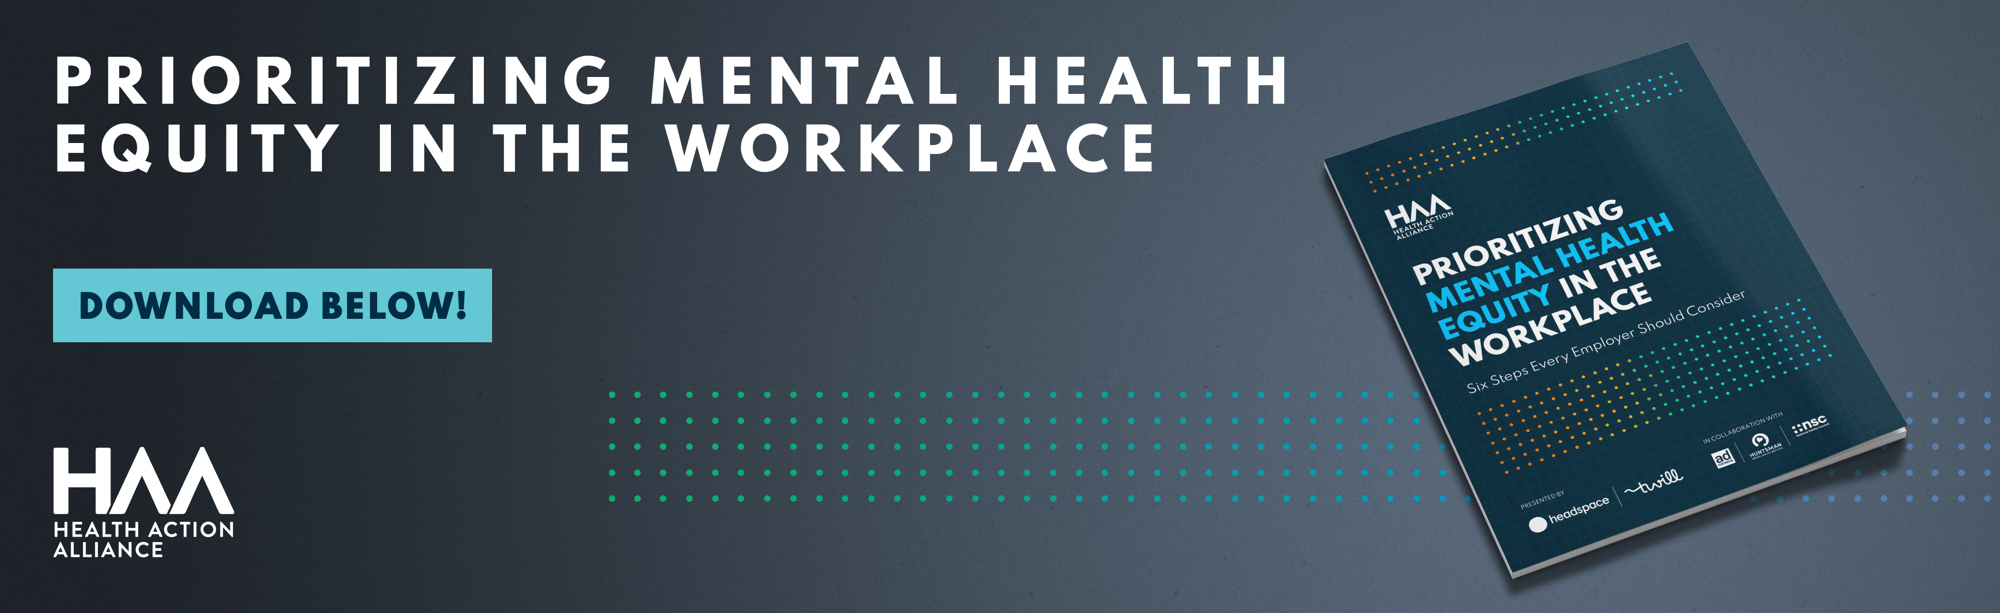 Prioritizing Mental Health Equity in the Workplace Banner